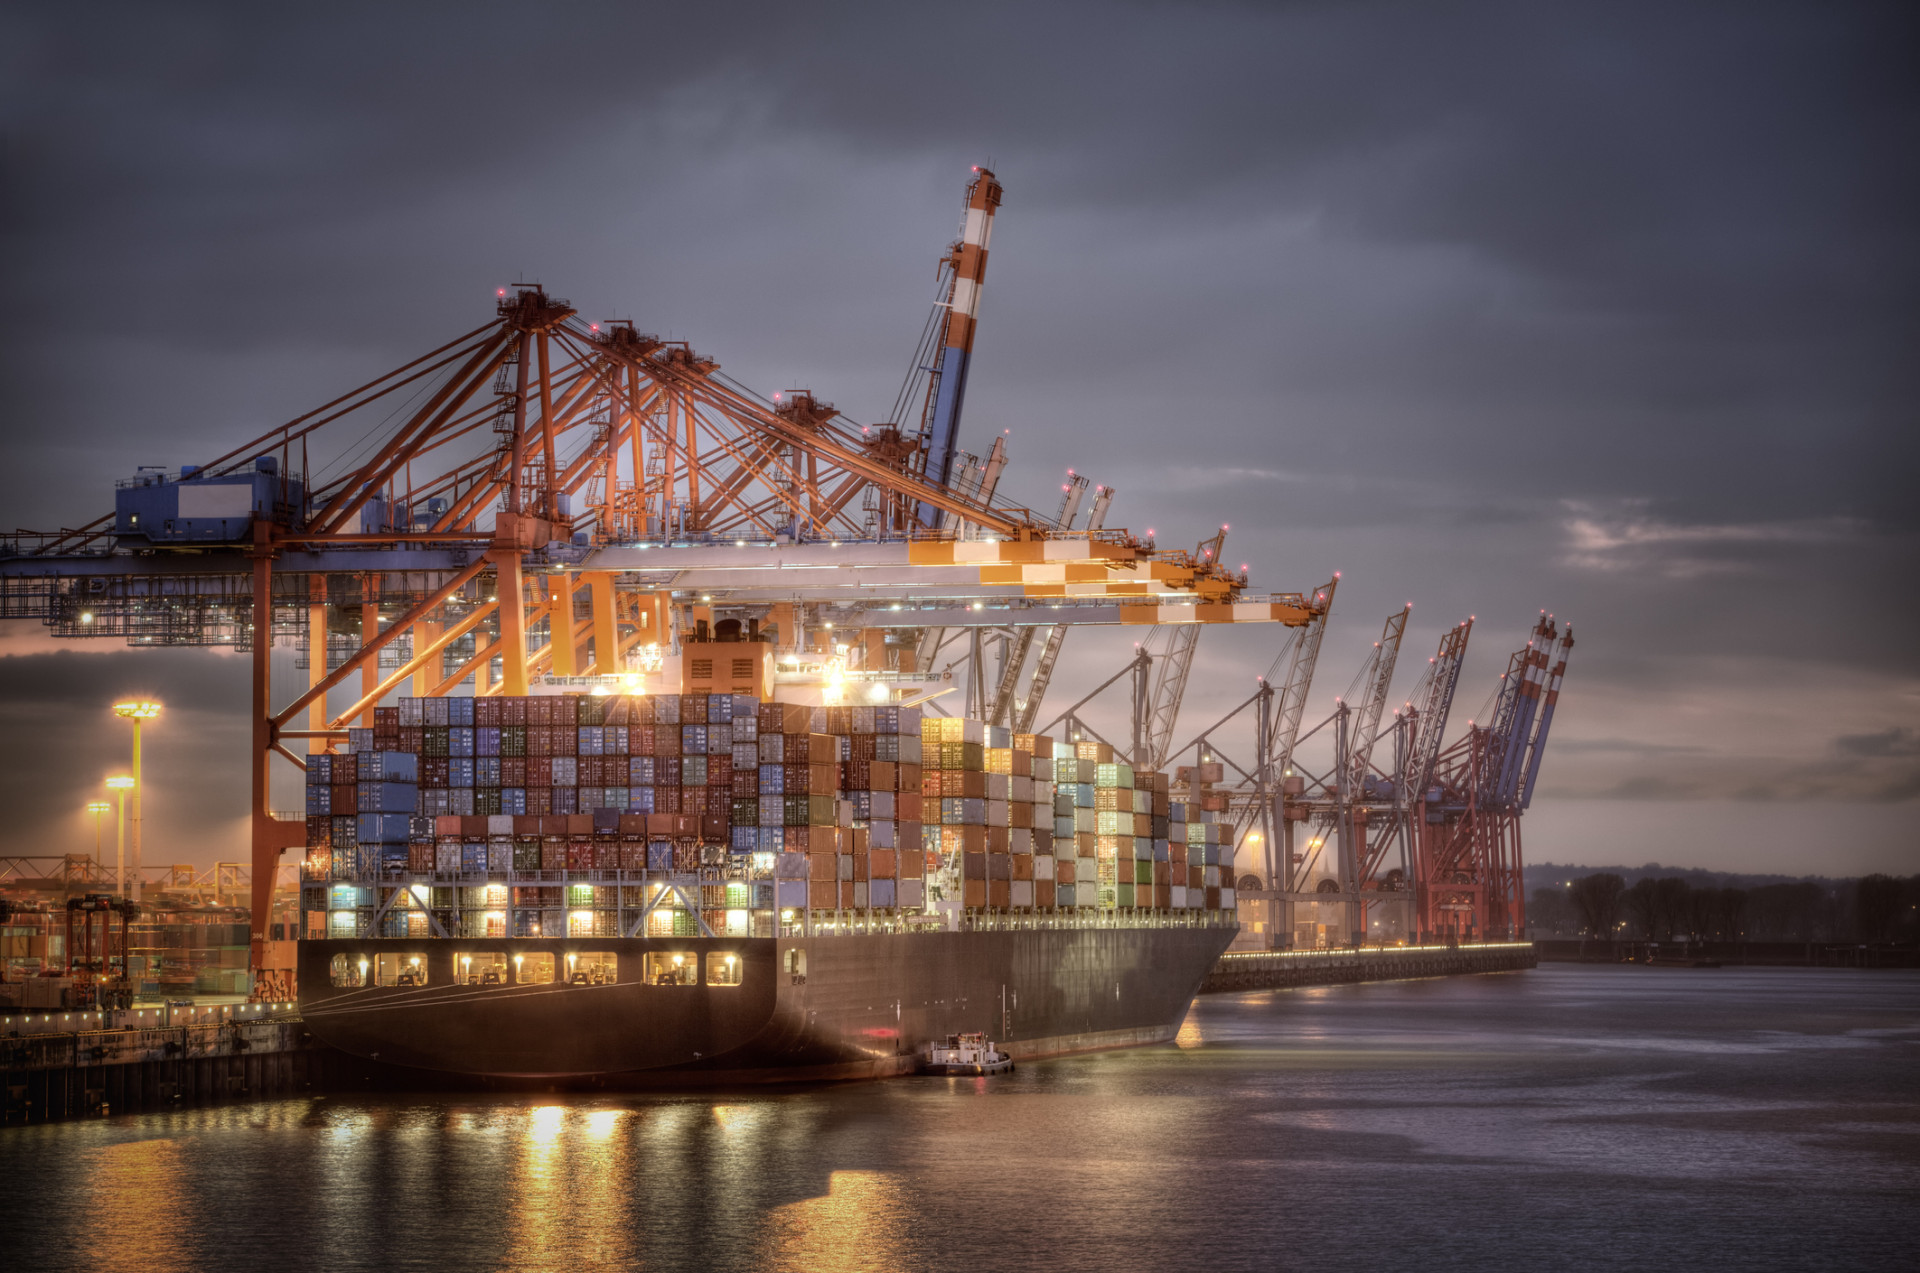 HIGH-PERFORMANCE SYNTHETIC LUBRICANTS FOR PORT EQUIPMENT